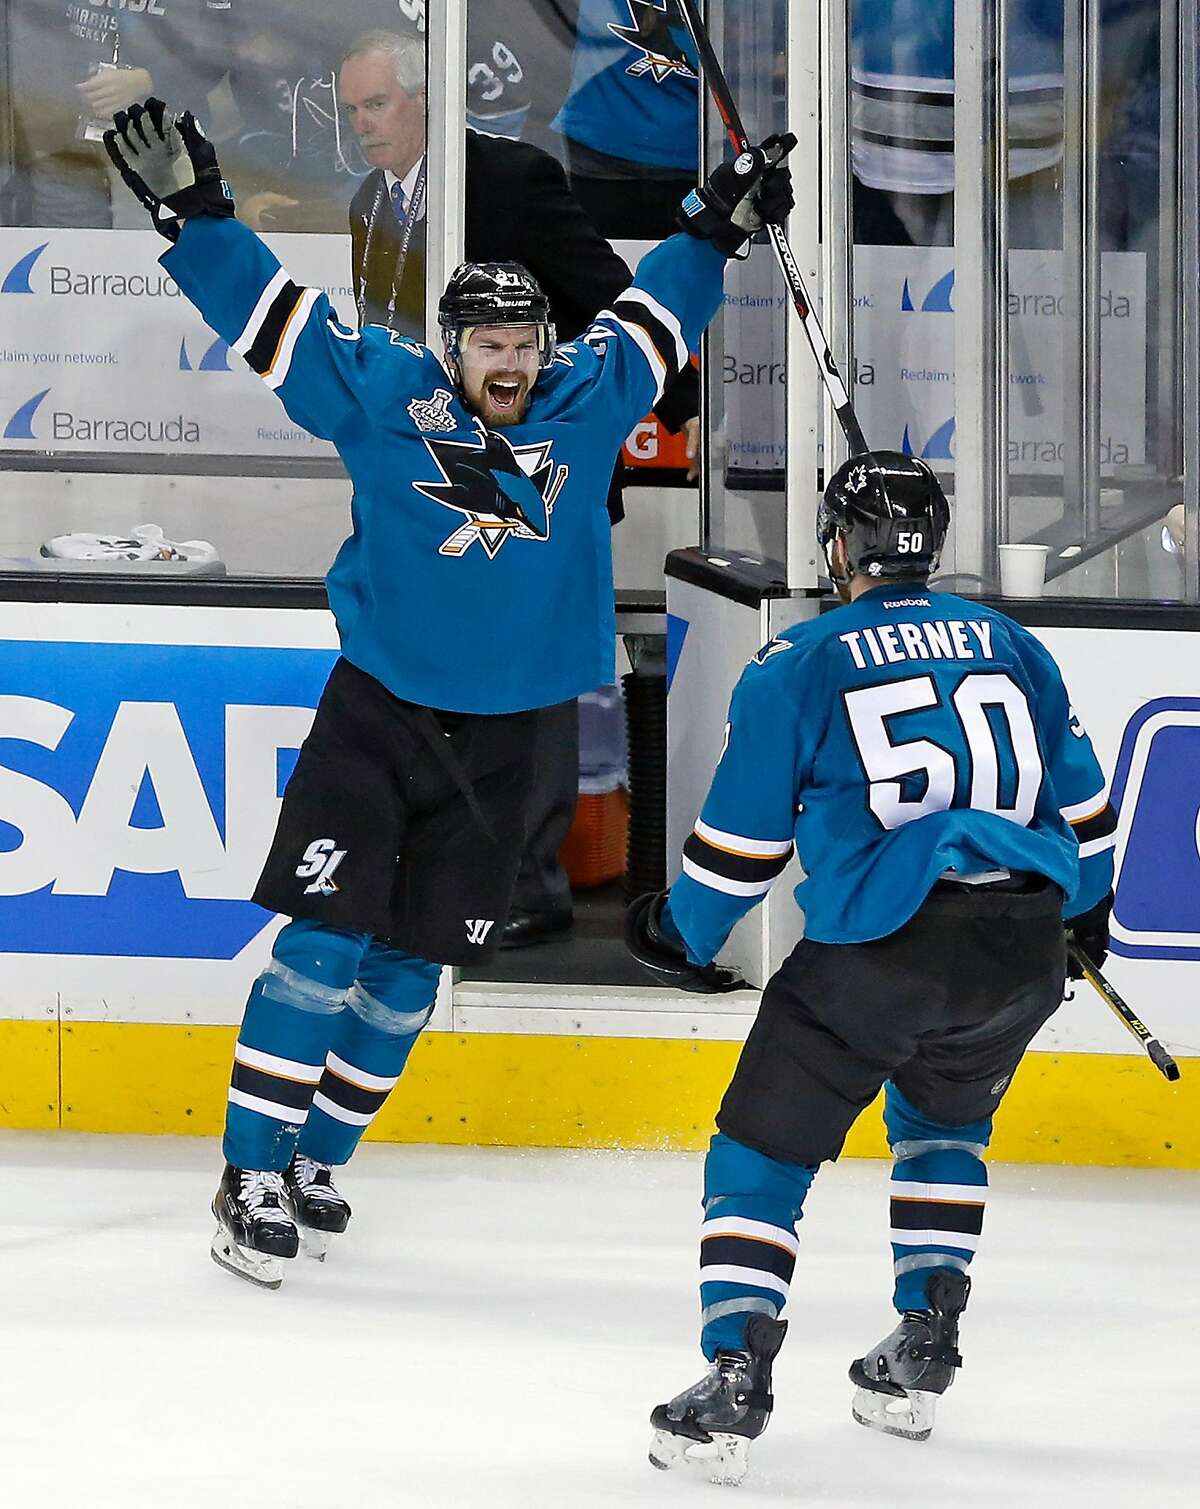 San Jose Sharks' Joonas Donskoi celebrates his game-winning goal with Chris Tierney in overtime of 3-2 win over Pittsburgh Penguins in Game 3 of NHL Stanley Cup Final at SAP Center in San Jose, Calif., on Saturday, June 4, 2016.